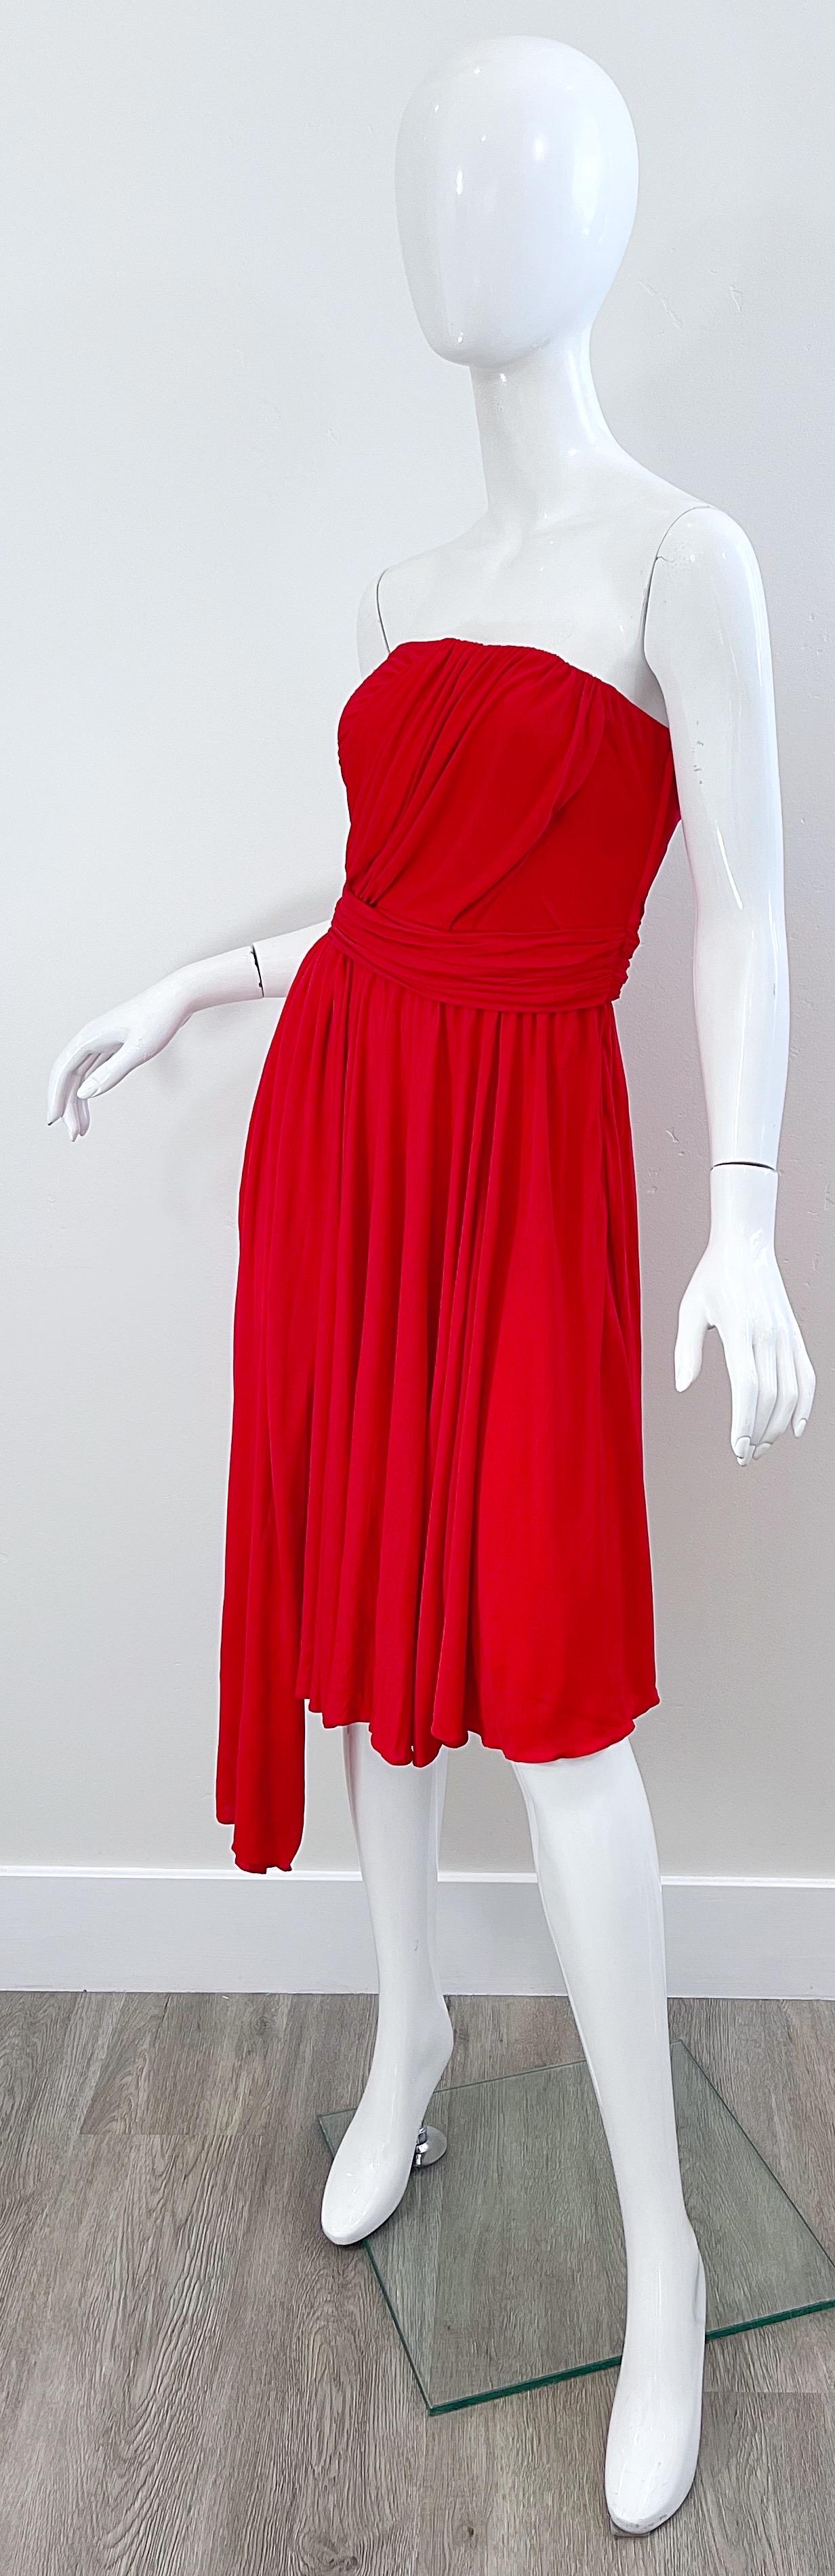 Runway Yves Saint Laurent S/S 1989 Lipstick Red Rayon Jersey Strapless 80s Dress For Sale 10